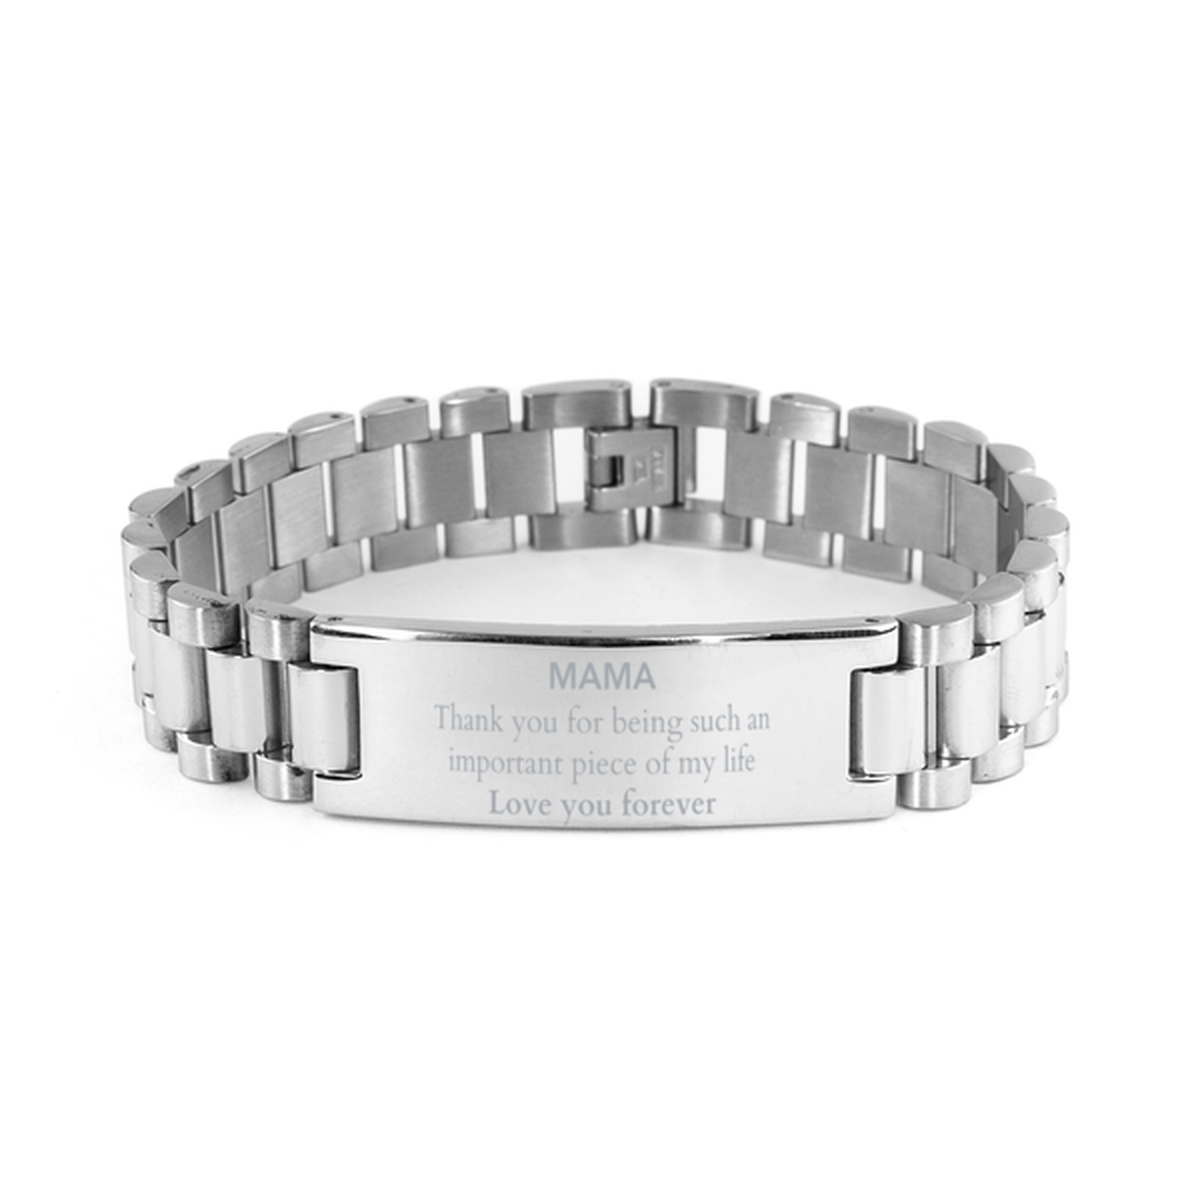 Appropriate Mama Ladder Stainless Steel Bracelet Epic Birthday Gifts for Mama Thank you for being such an important piece of my life Mama Christmas Mothers Fathers Day